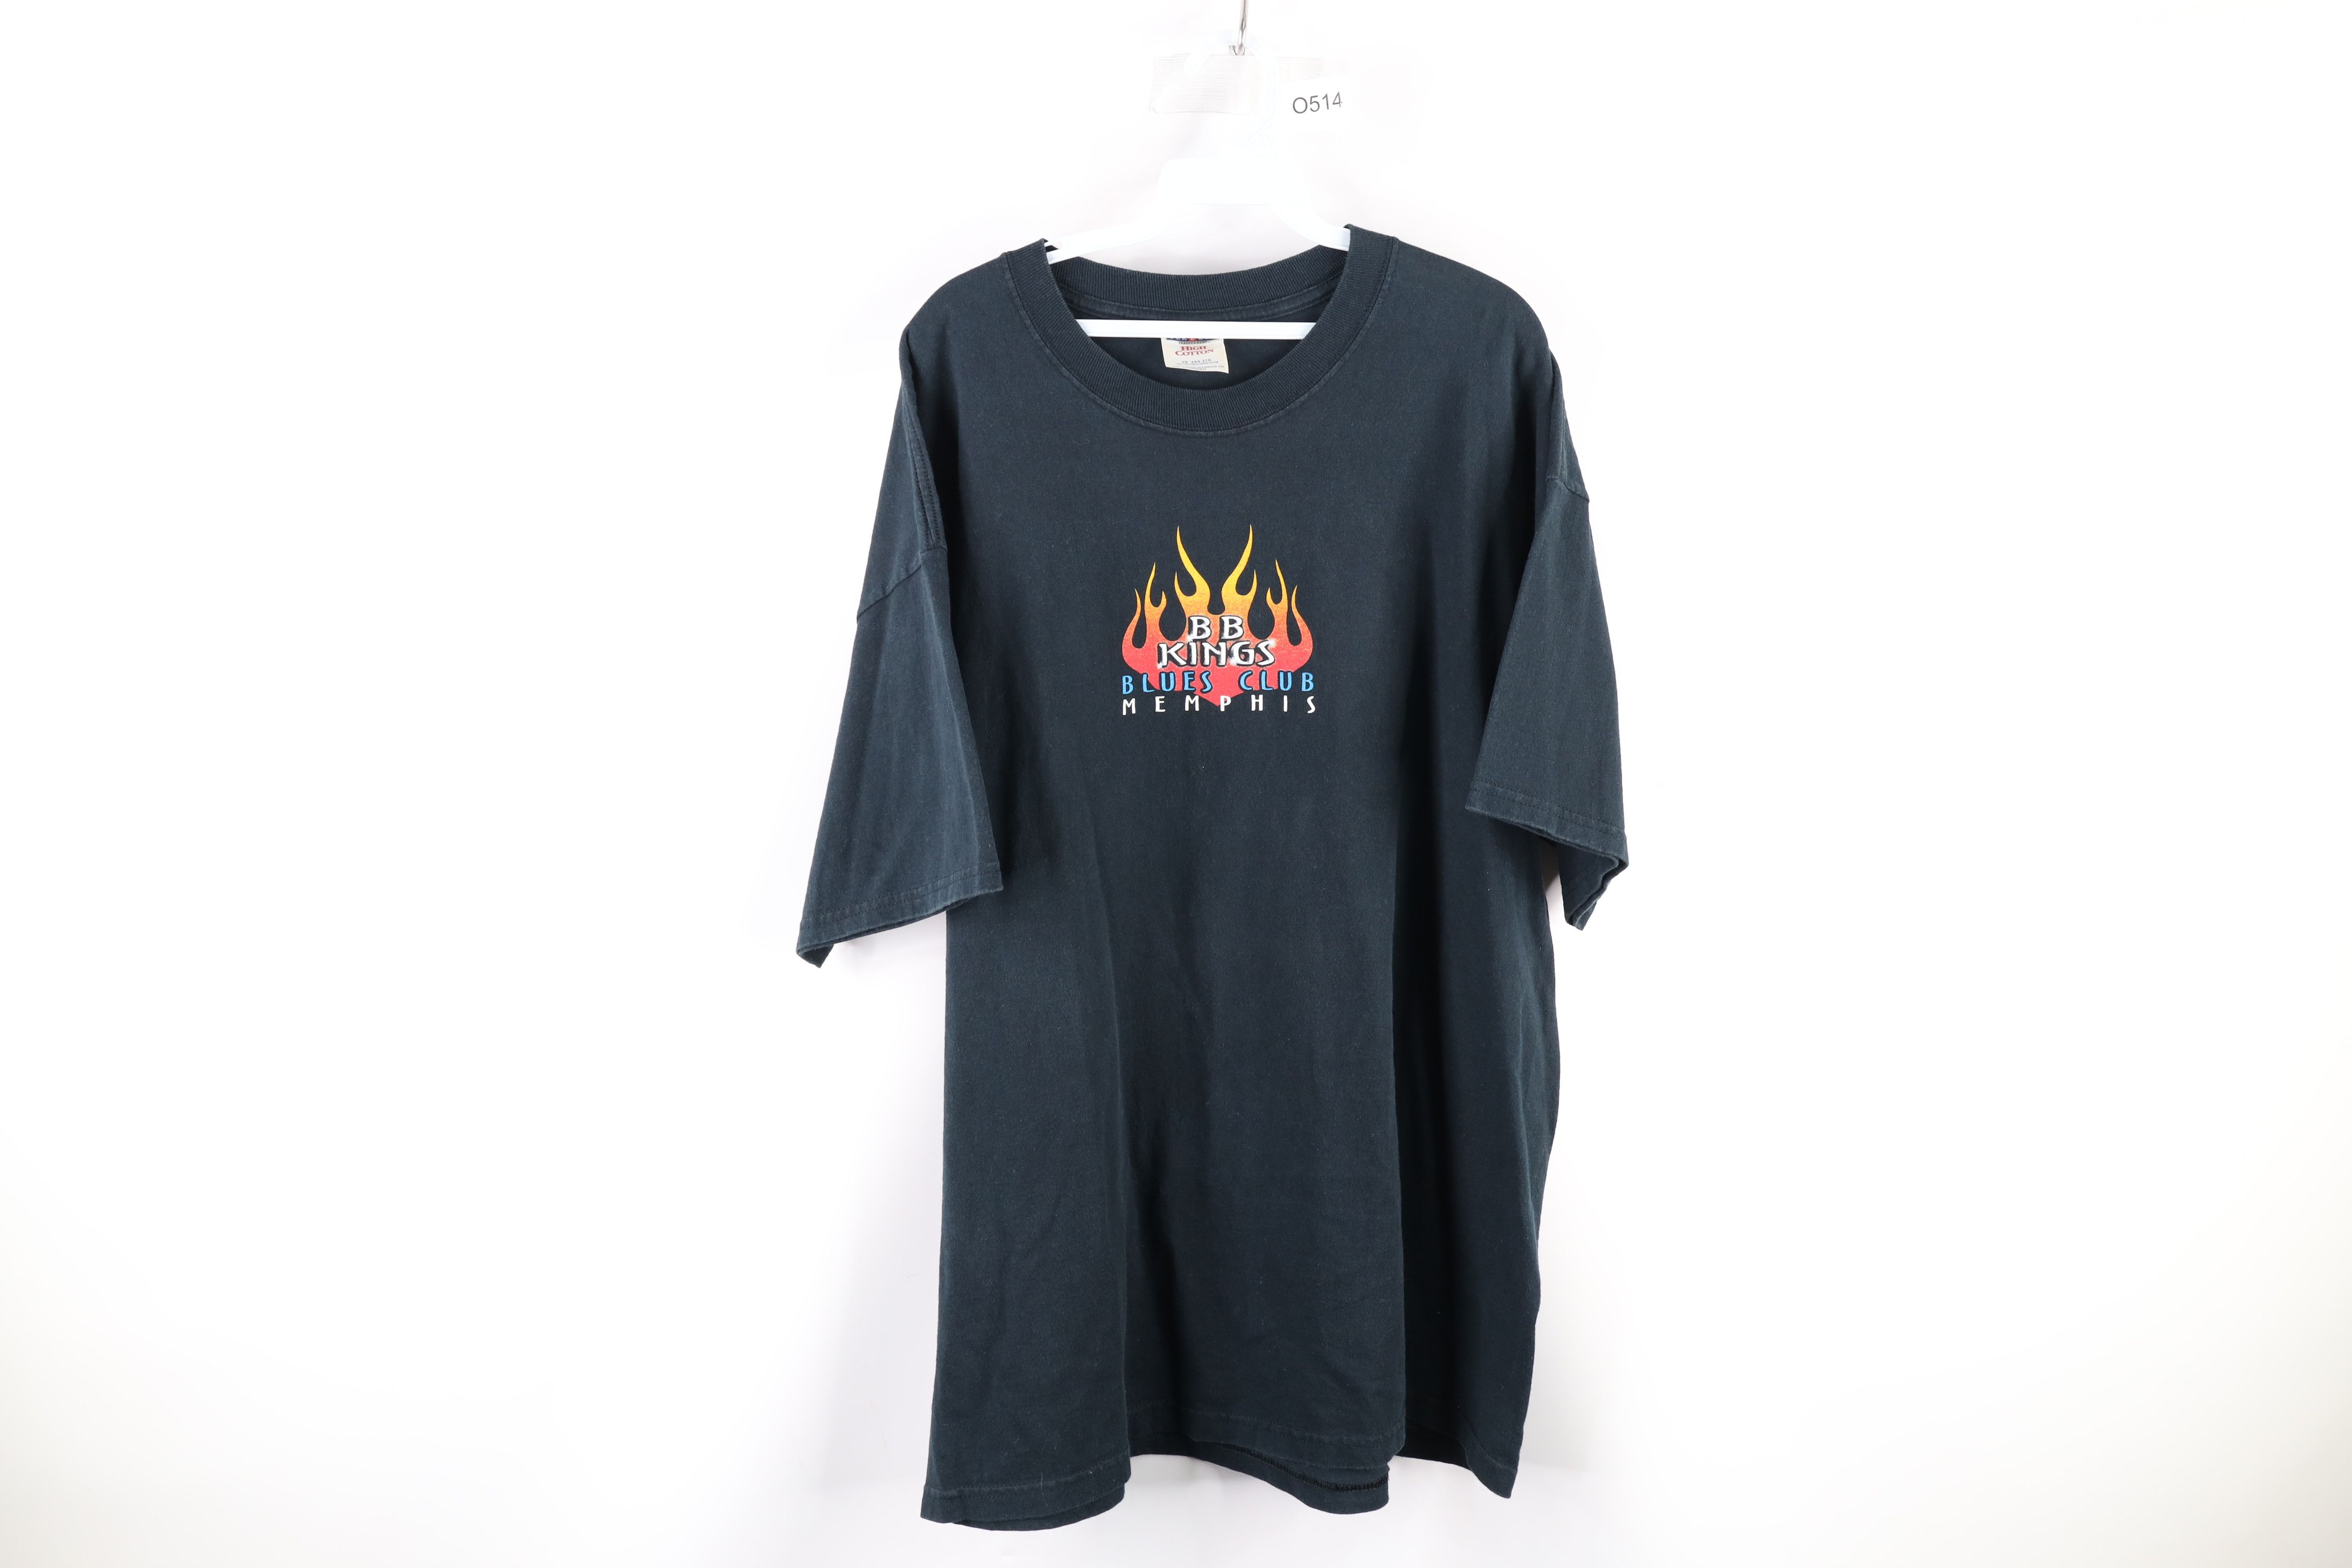 Vintage Vintage Faded Spell BB King Blues Club Fire Flames T-Shirt Size US XXL / EU 58 / 5 - 1 Preview